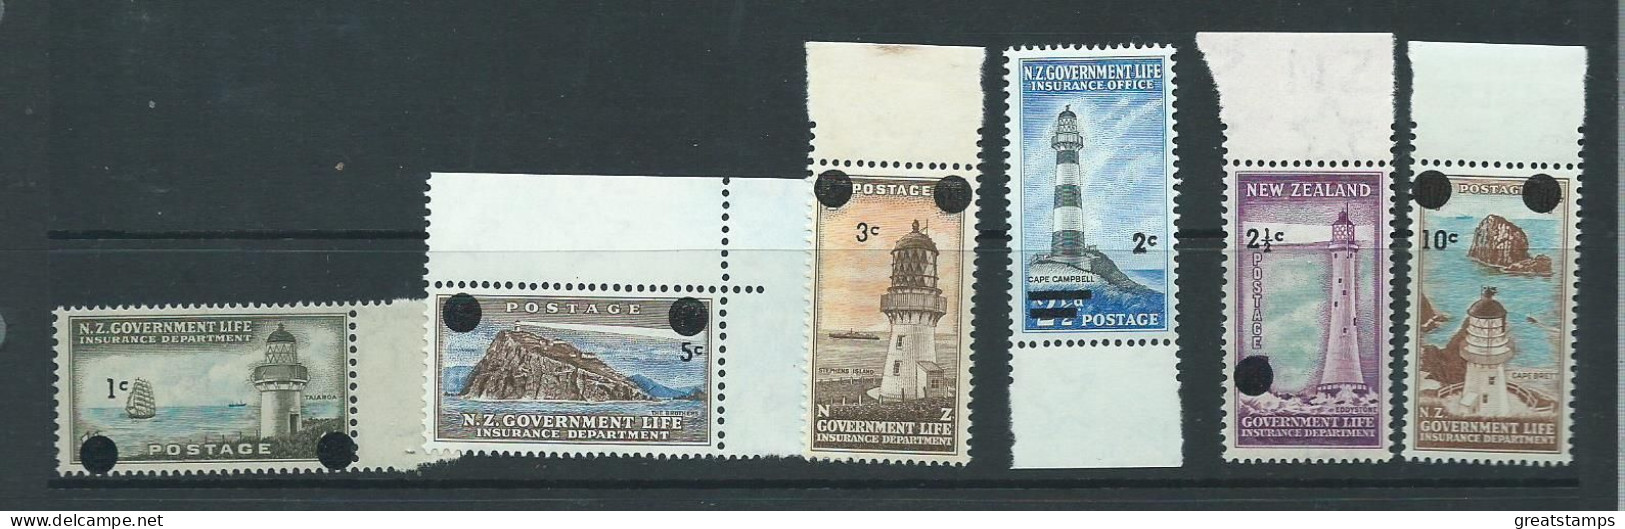 New Zealand Stamps Life Insurance Lighthouse1967 Mnh Set Surcharges - Unused Stamps